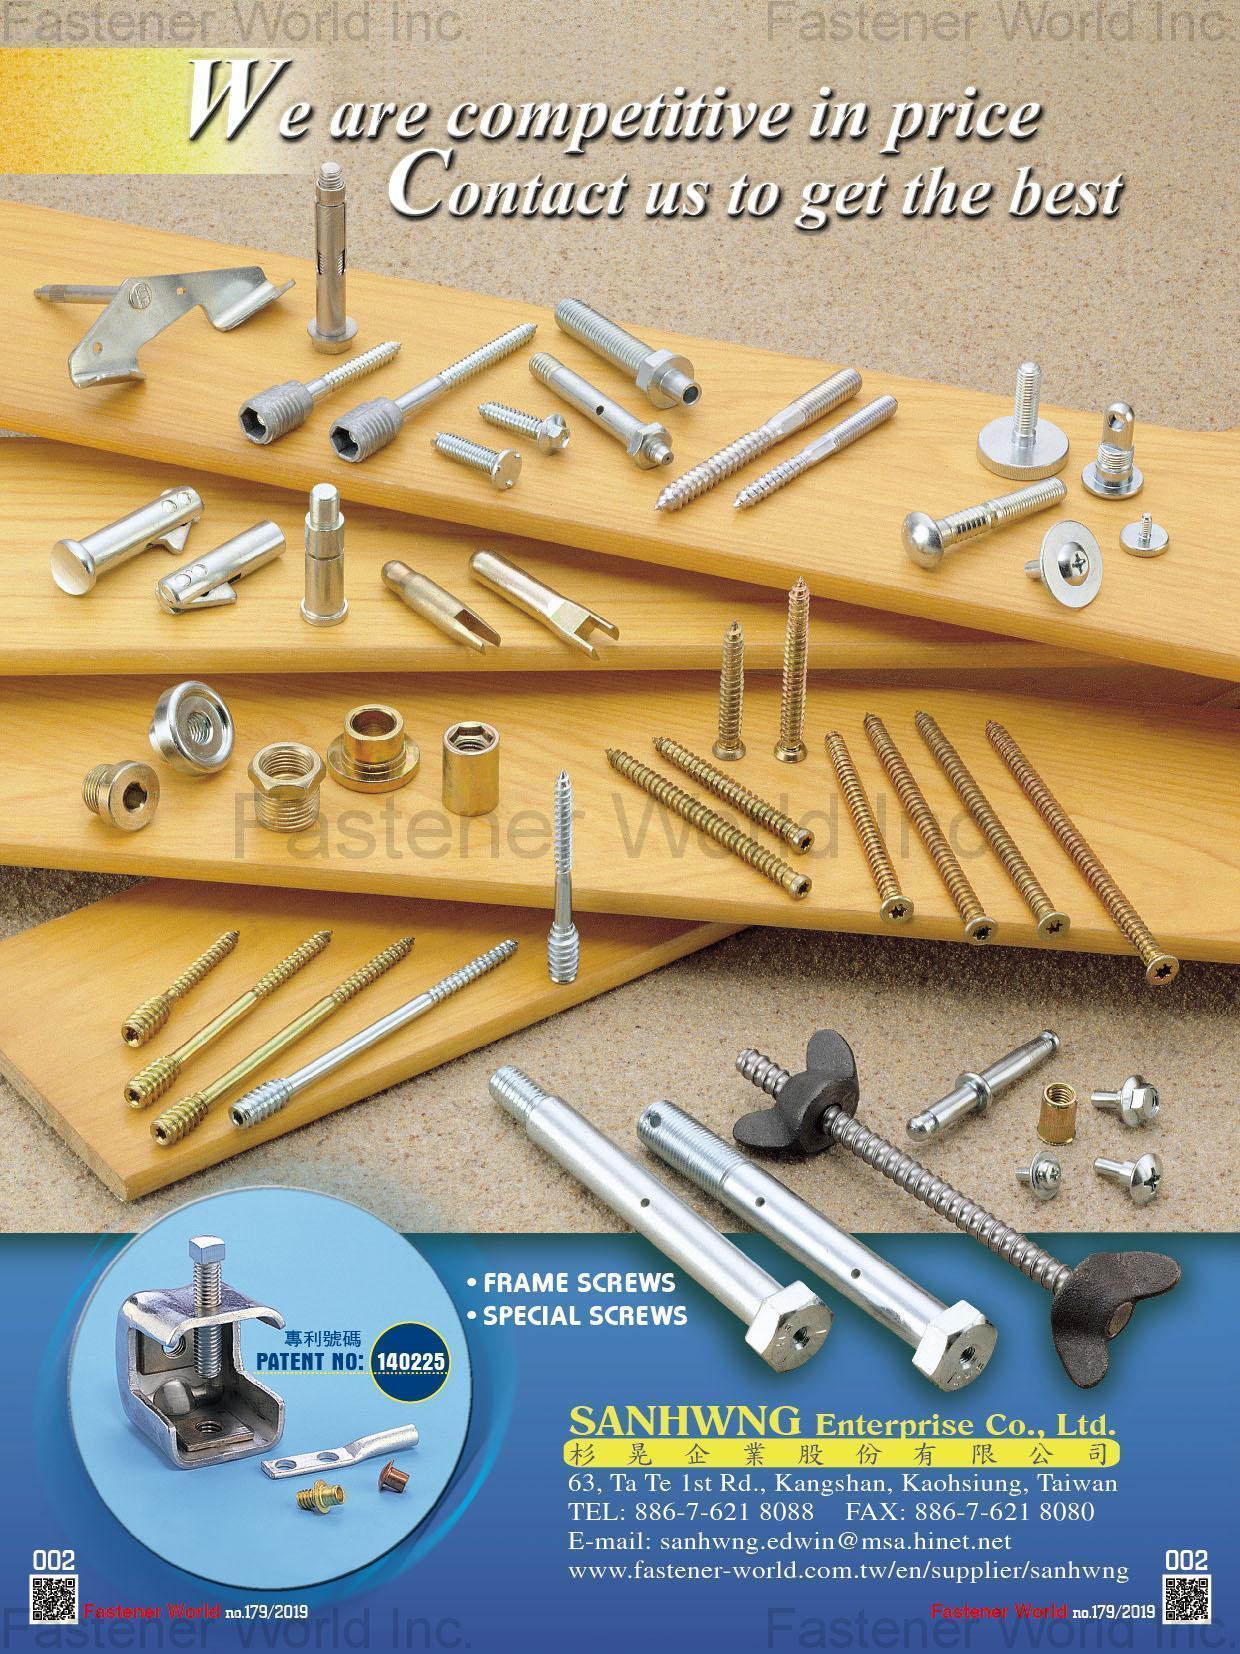 SANHWNG ENTERPRISE CO., LTD  , Frame Screws, Special Screws, Pipe Anchors, Wall Anchors, Spring Washers, Countersunk Bolts, Square Head Bolts, Button Head Socket Cap Screws, Countersunk Screws, Double Lead Thread Screws, Double-head Screws / Bolts, All Kinds Of Nuts, Flange Nuts, Concrete Screws, Spacers, Stainless Steel Screws , Security Screws